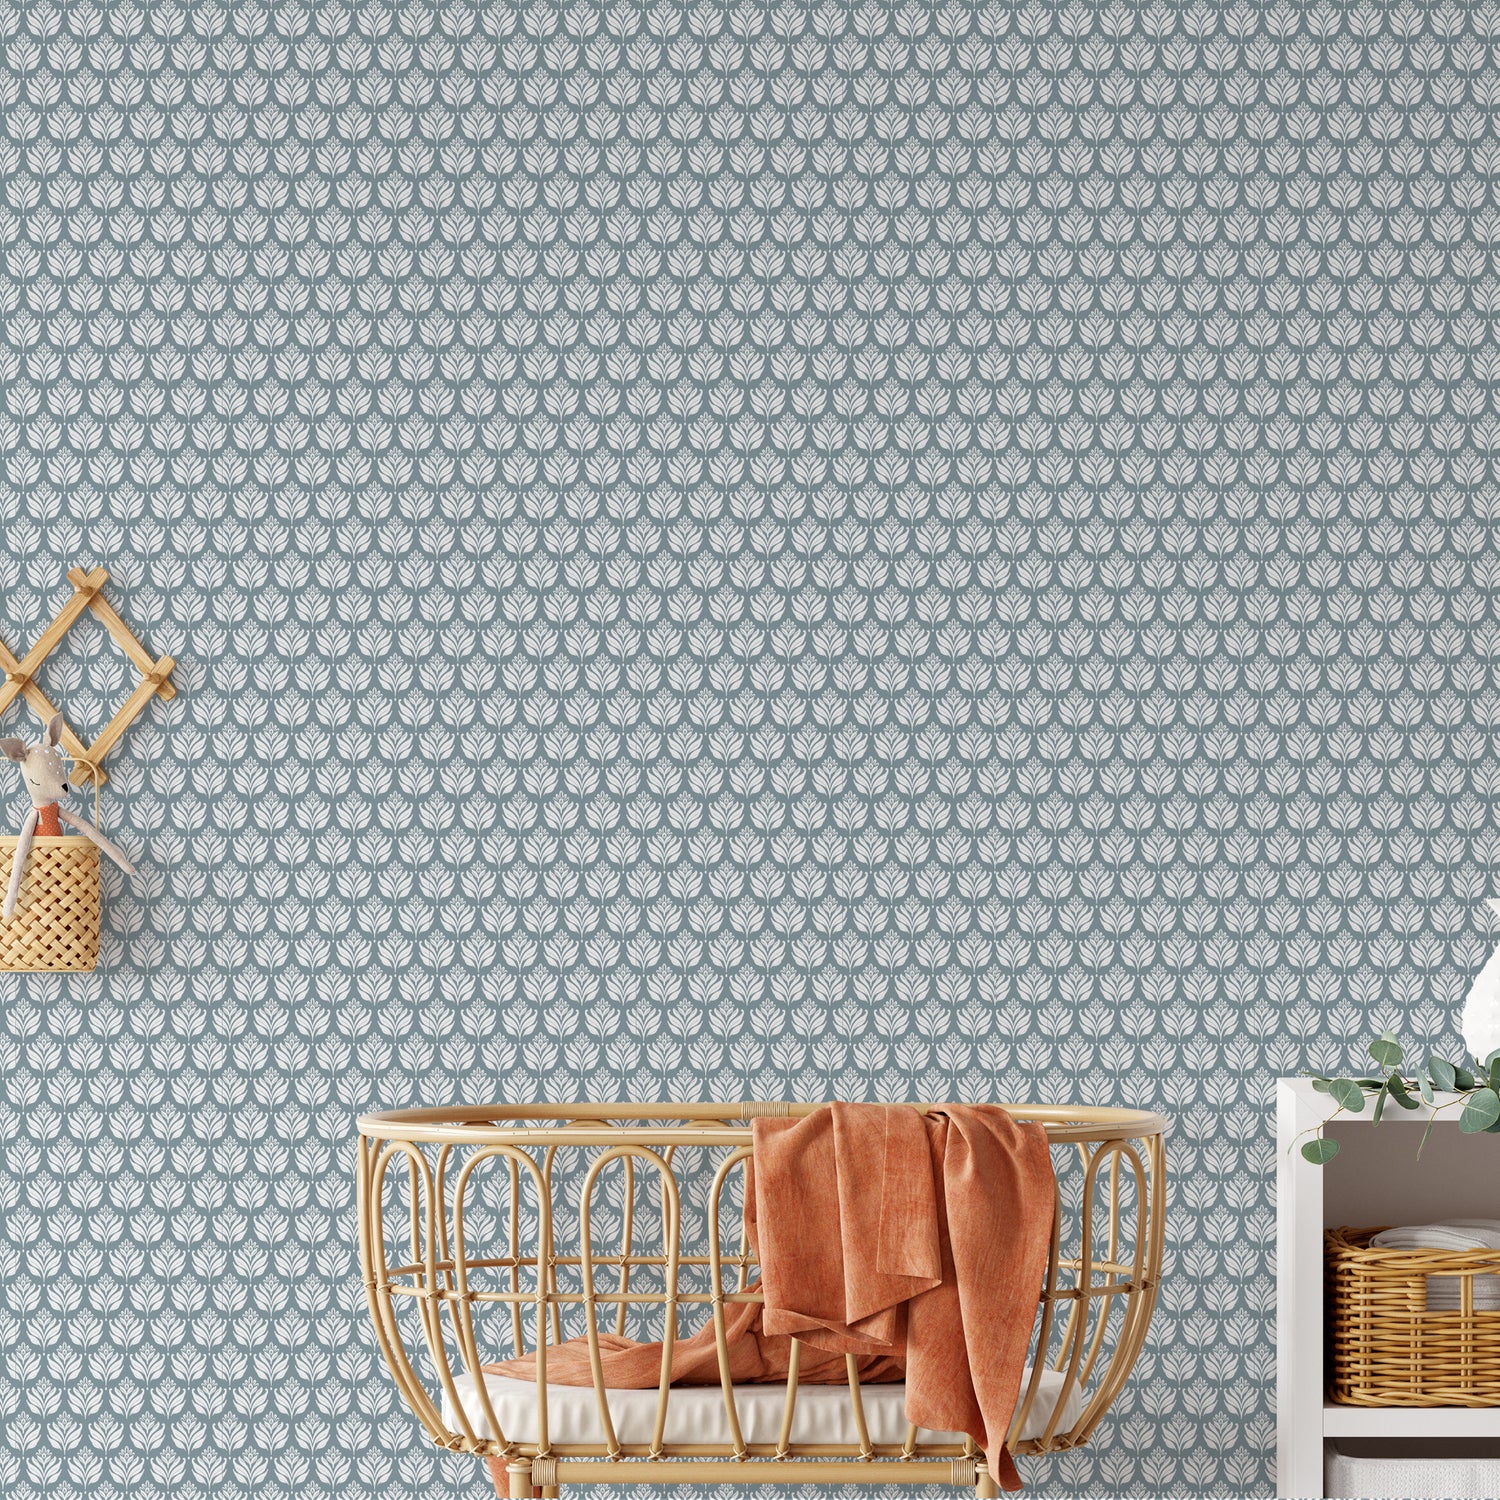 Introducing our Elegant Leaves Wallpaper in Slate. These subtle leaves add a touch of sophistication to any space. Elevate your room with our premium wallpaper, designed for those with refined taste.